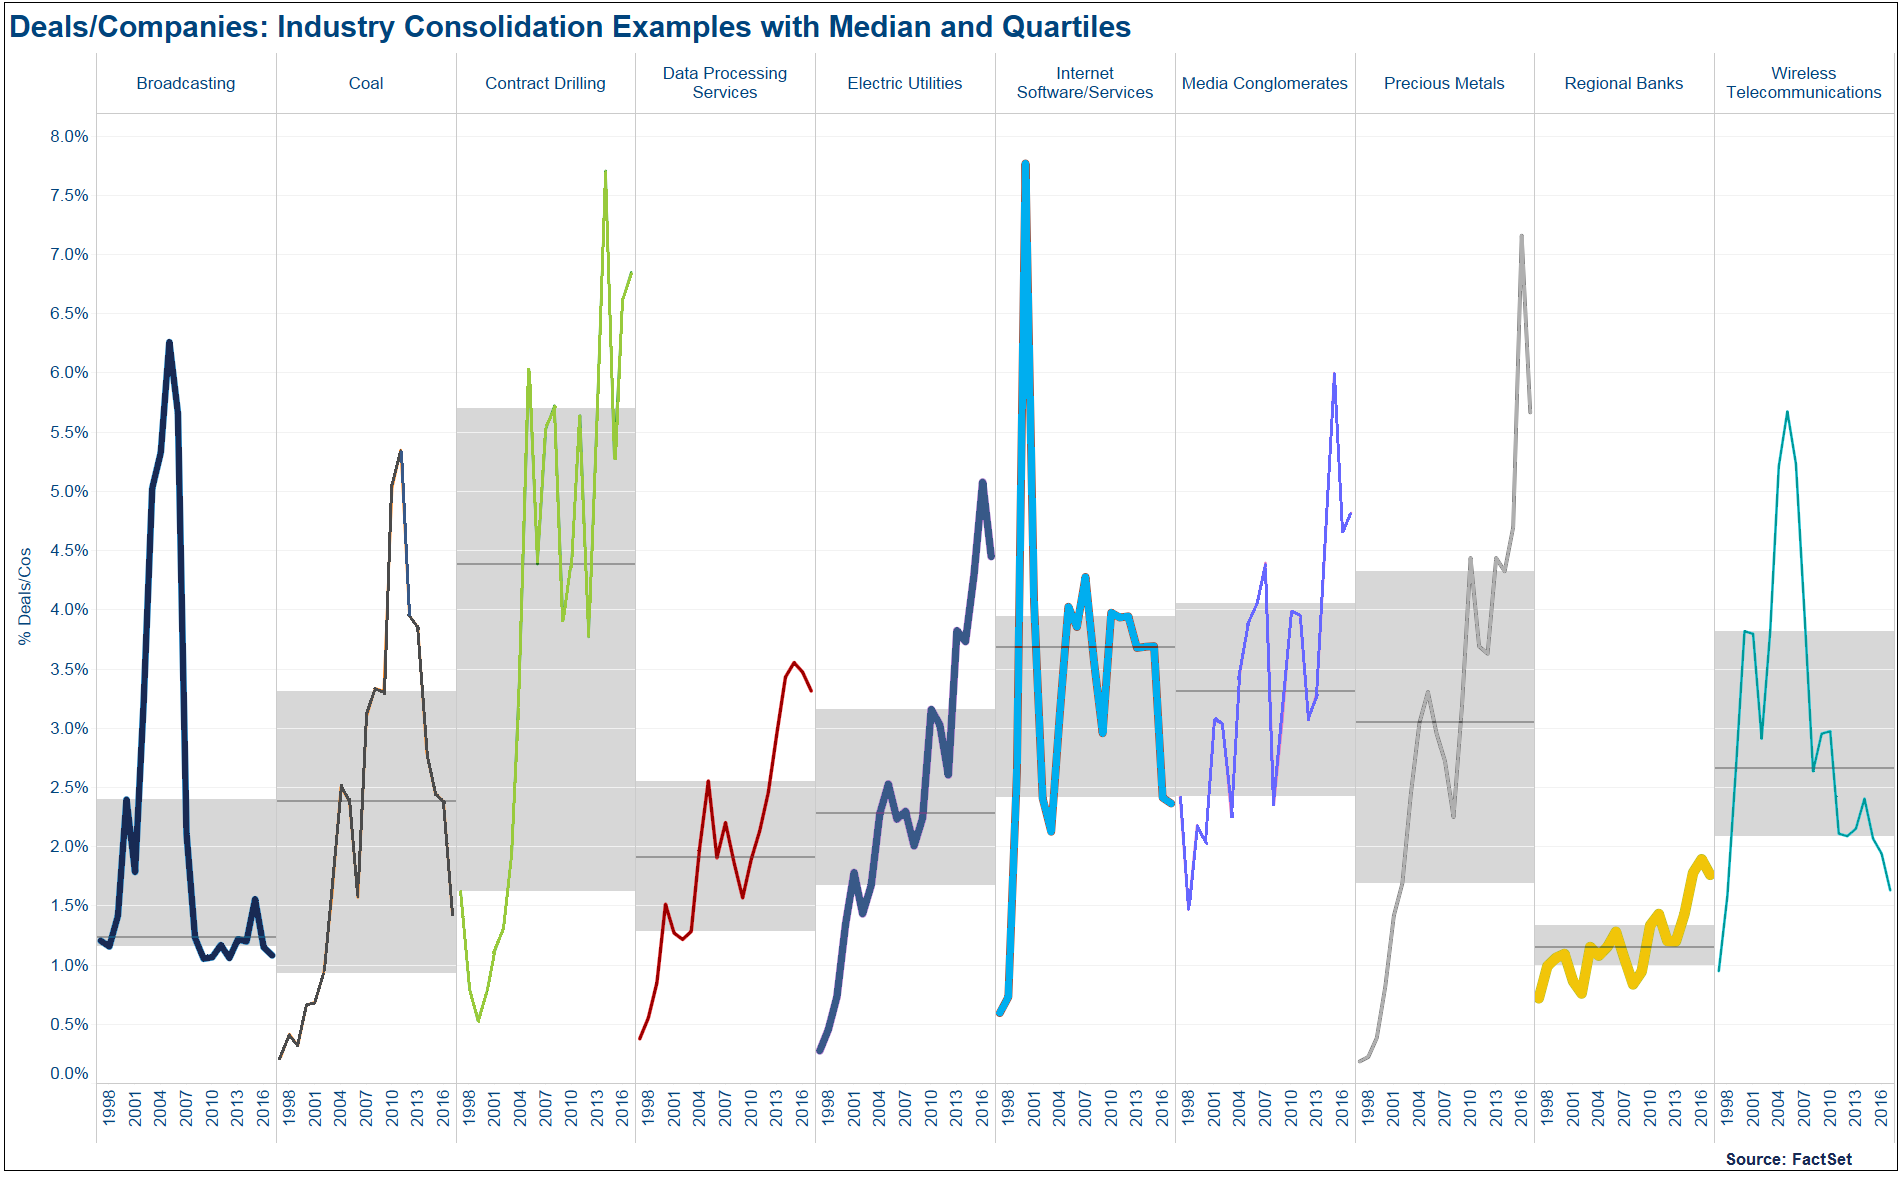 Deals and Companies: Industry consolidation examples with median and quartiles